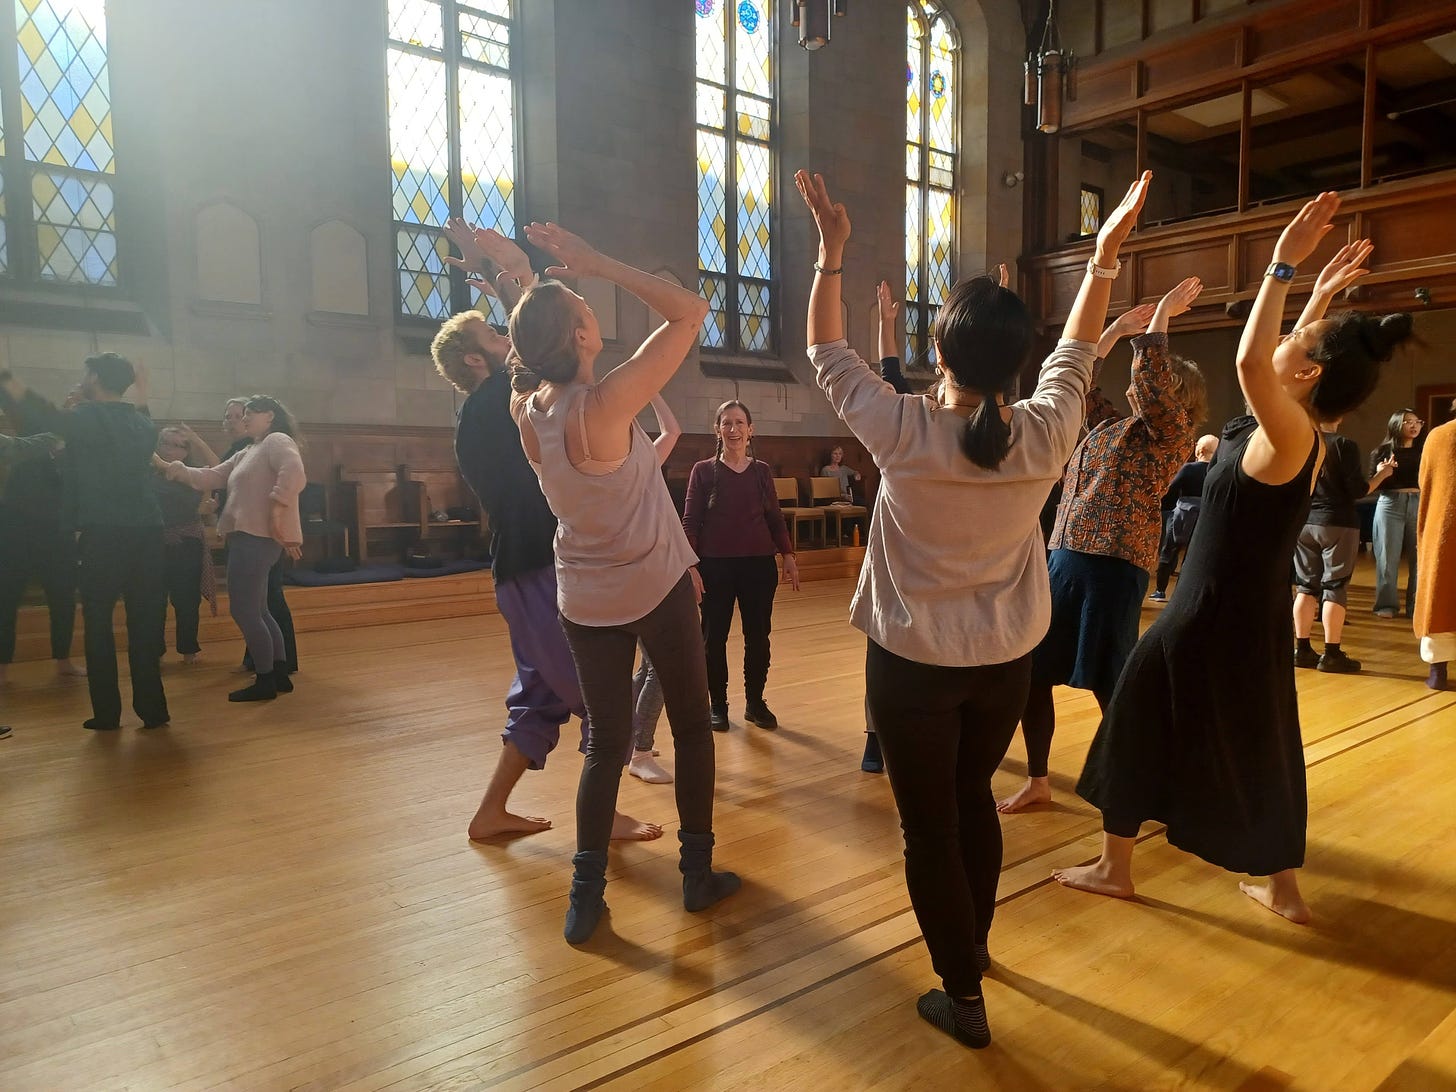 People are spread out in clusters in a large former chapel with stained glass windows and a golden wood floor. In the foreground Meredith Monk observes a circle of five people who are all leaning back with their arms in the air.